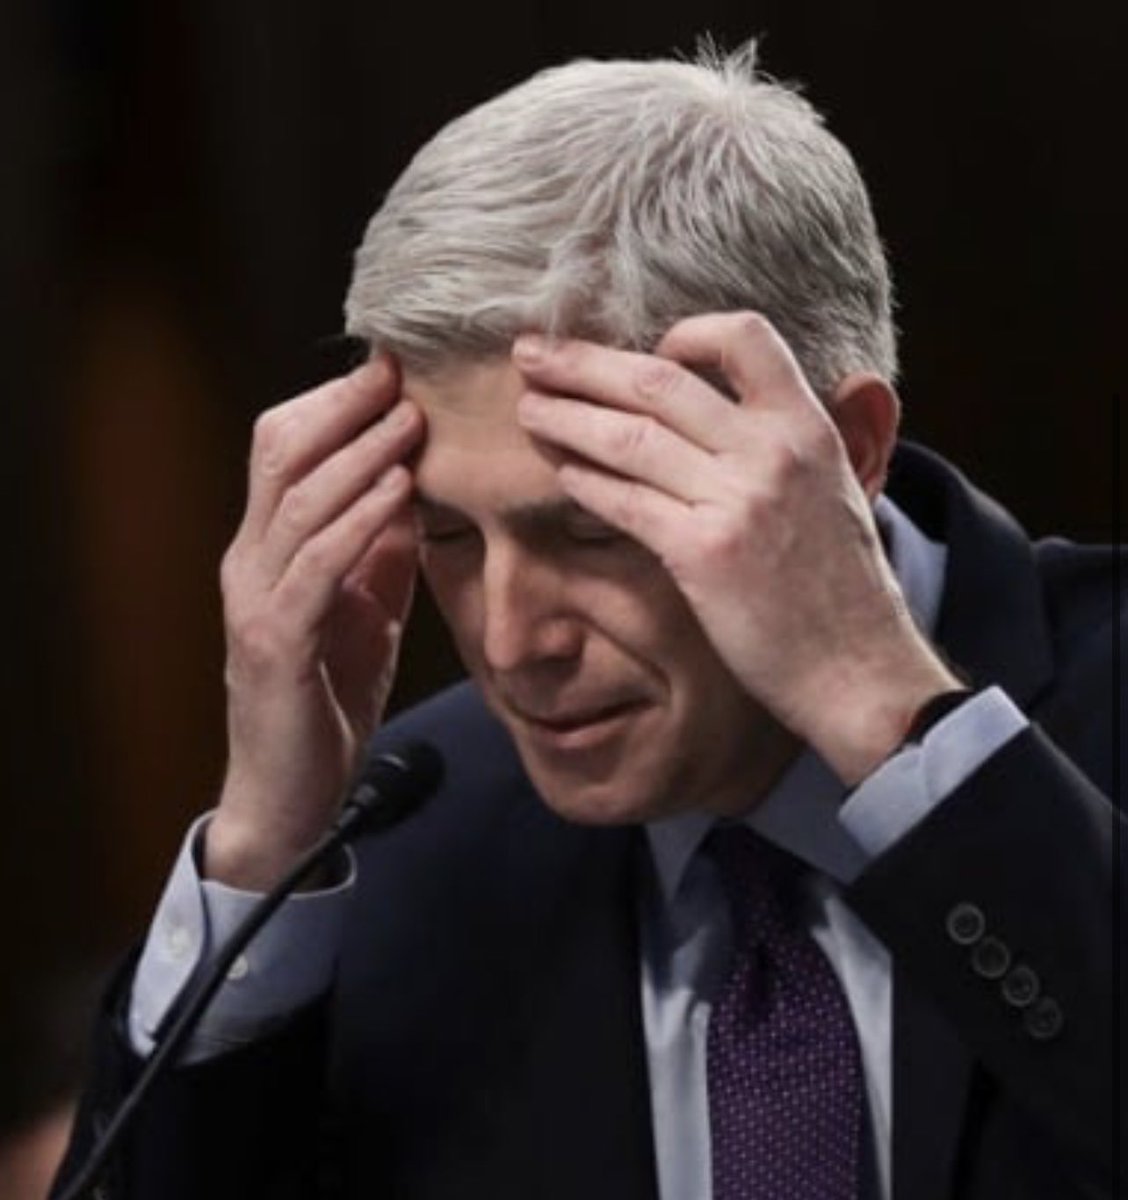 🚨 OUTRAGEOUS: Justice Neil Gorsuch FAILED to properly report a real estate sale to the CEO of law firm with cases before Supreme Court. After nearly two years of finding no buyers, Supreme Court Justice Neil Gorsuch found a buyer for his 40-acre co-owned tract of property in…